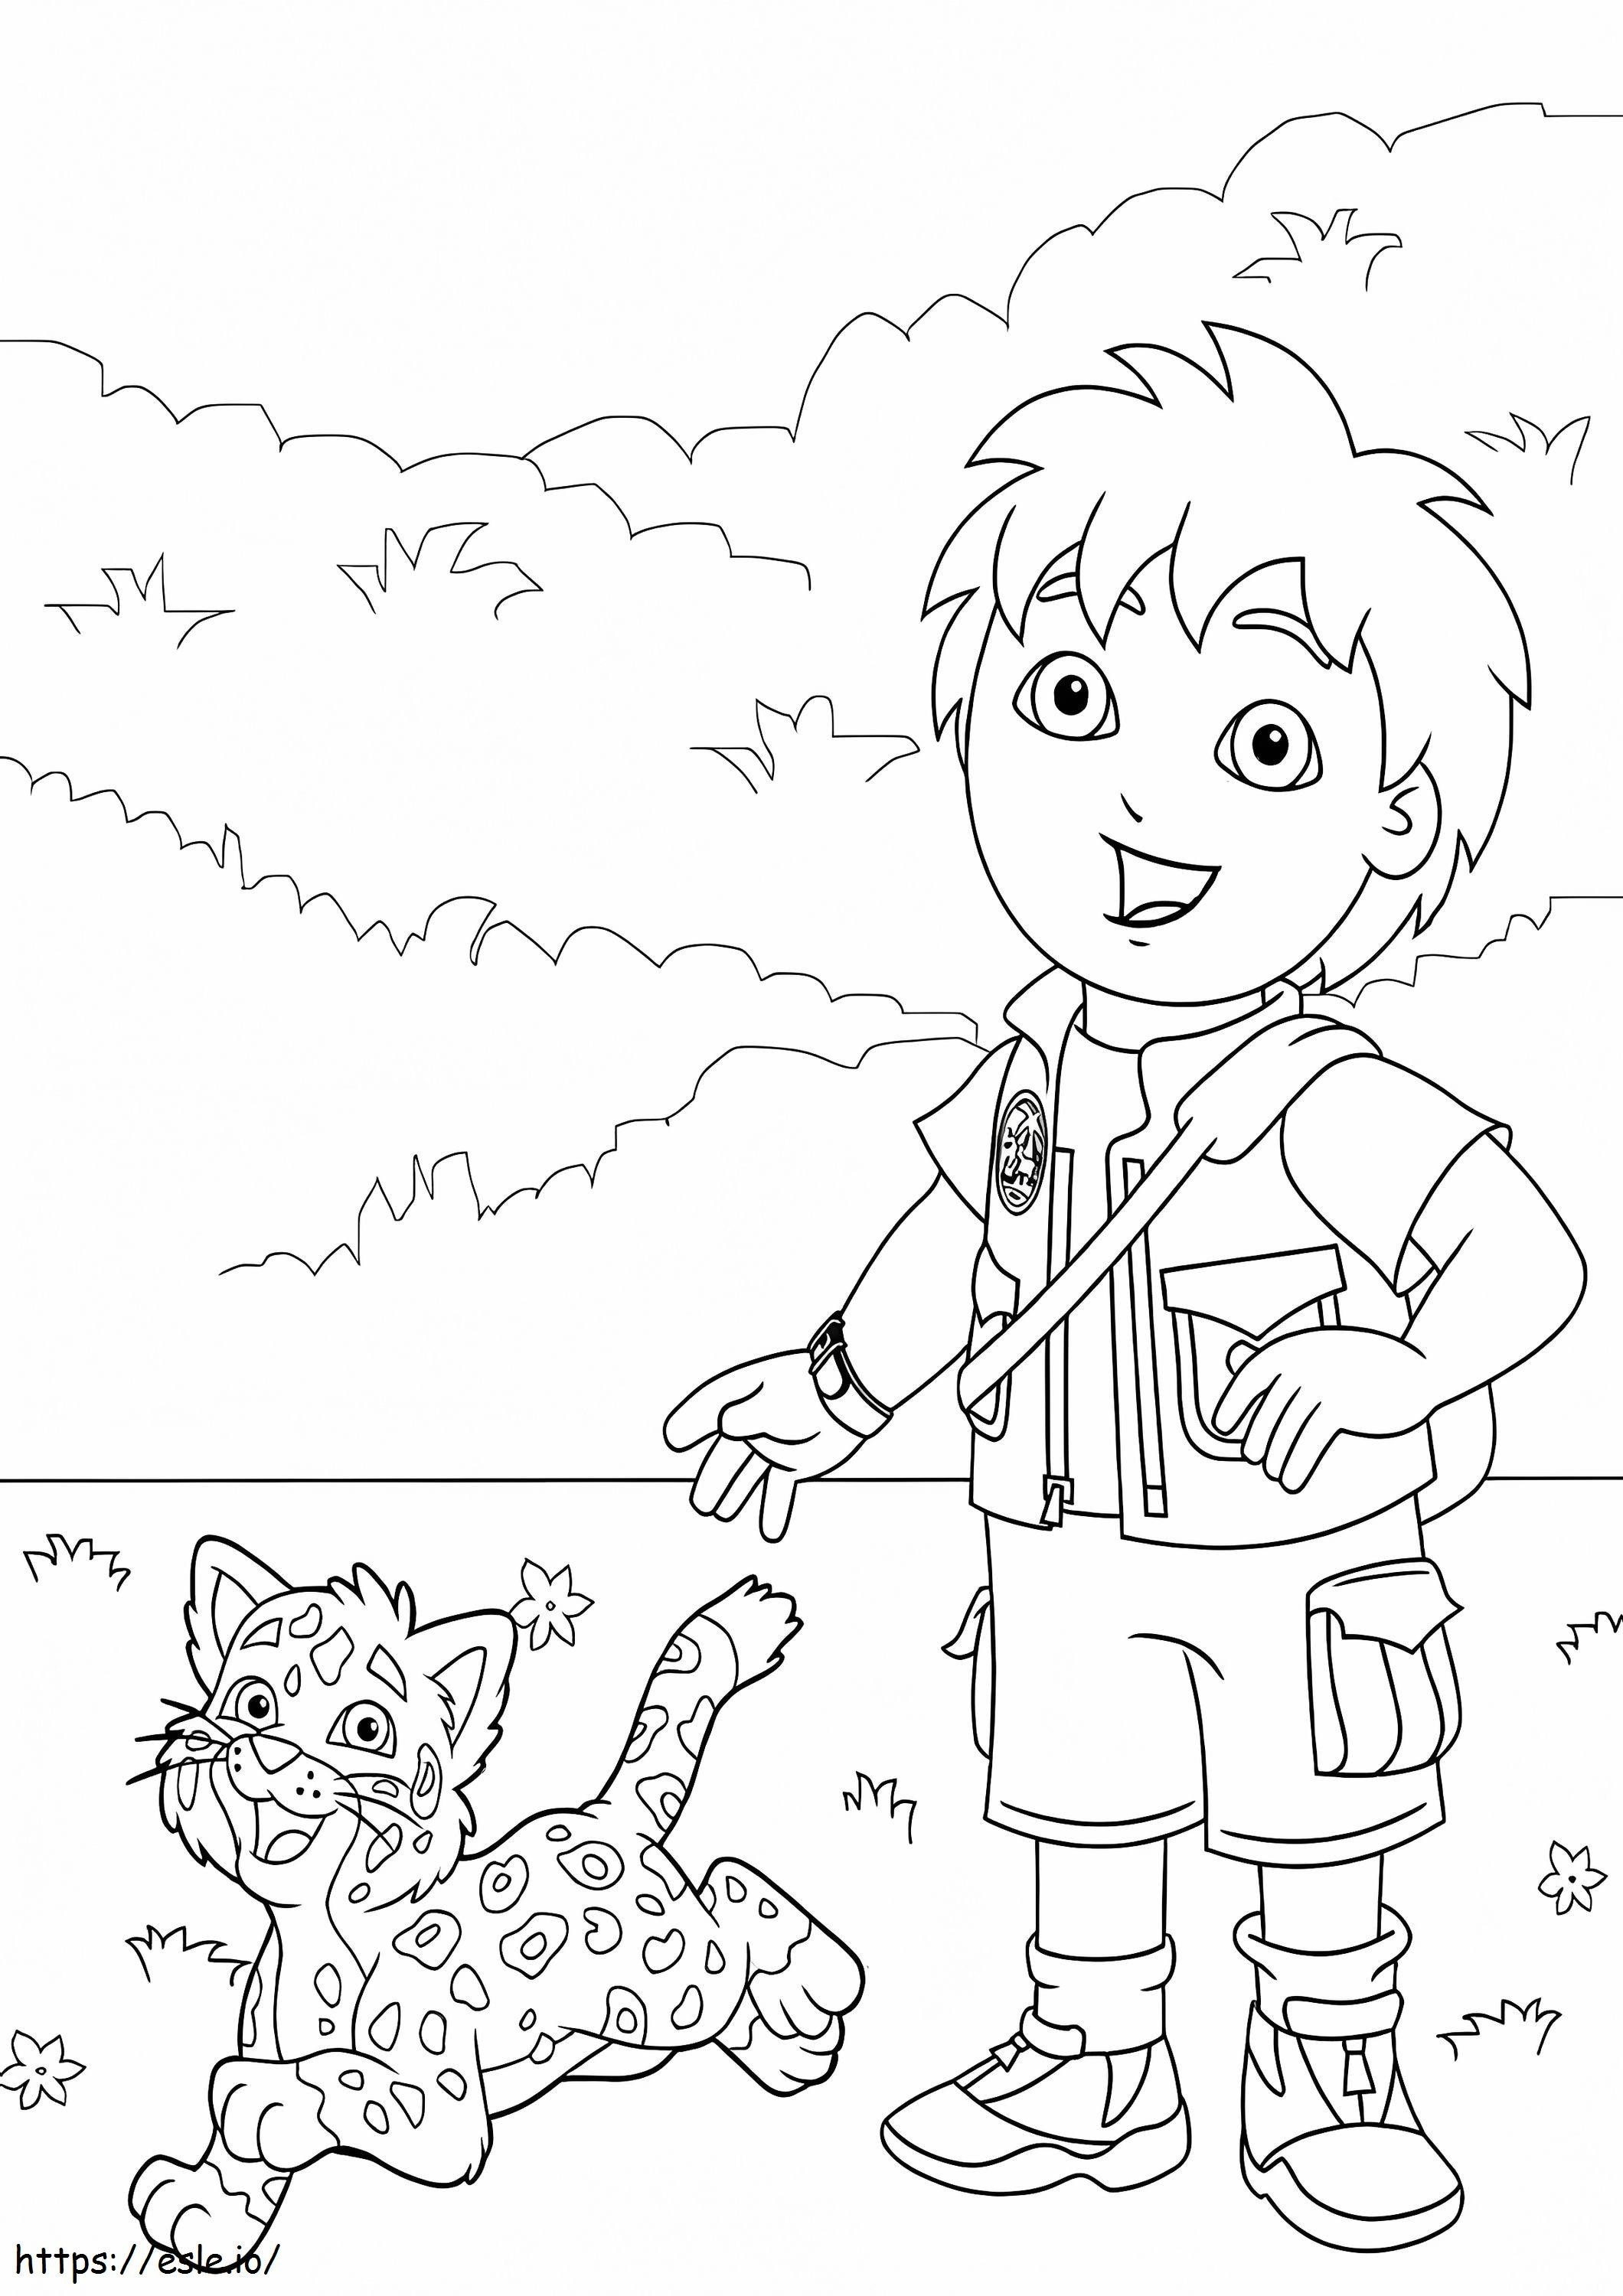 Stunning Diego And The Baby Jaguar coloring page